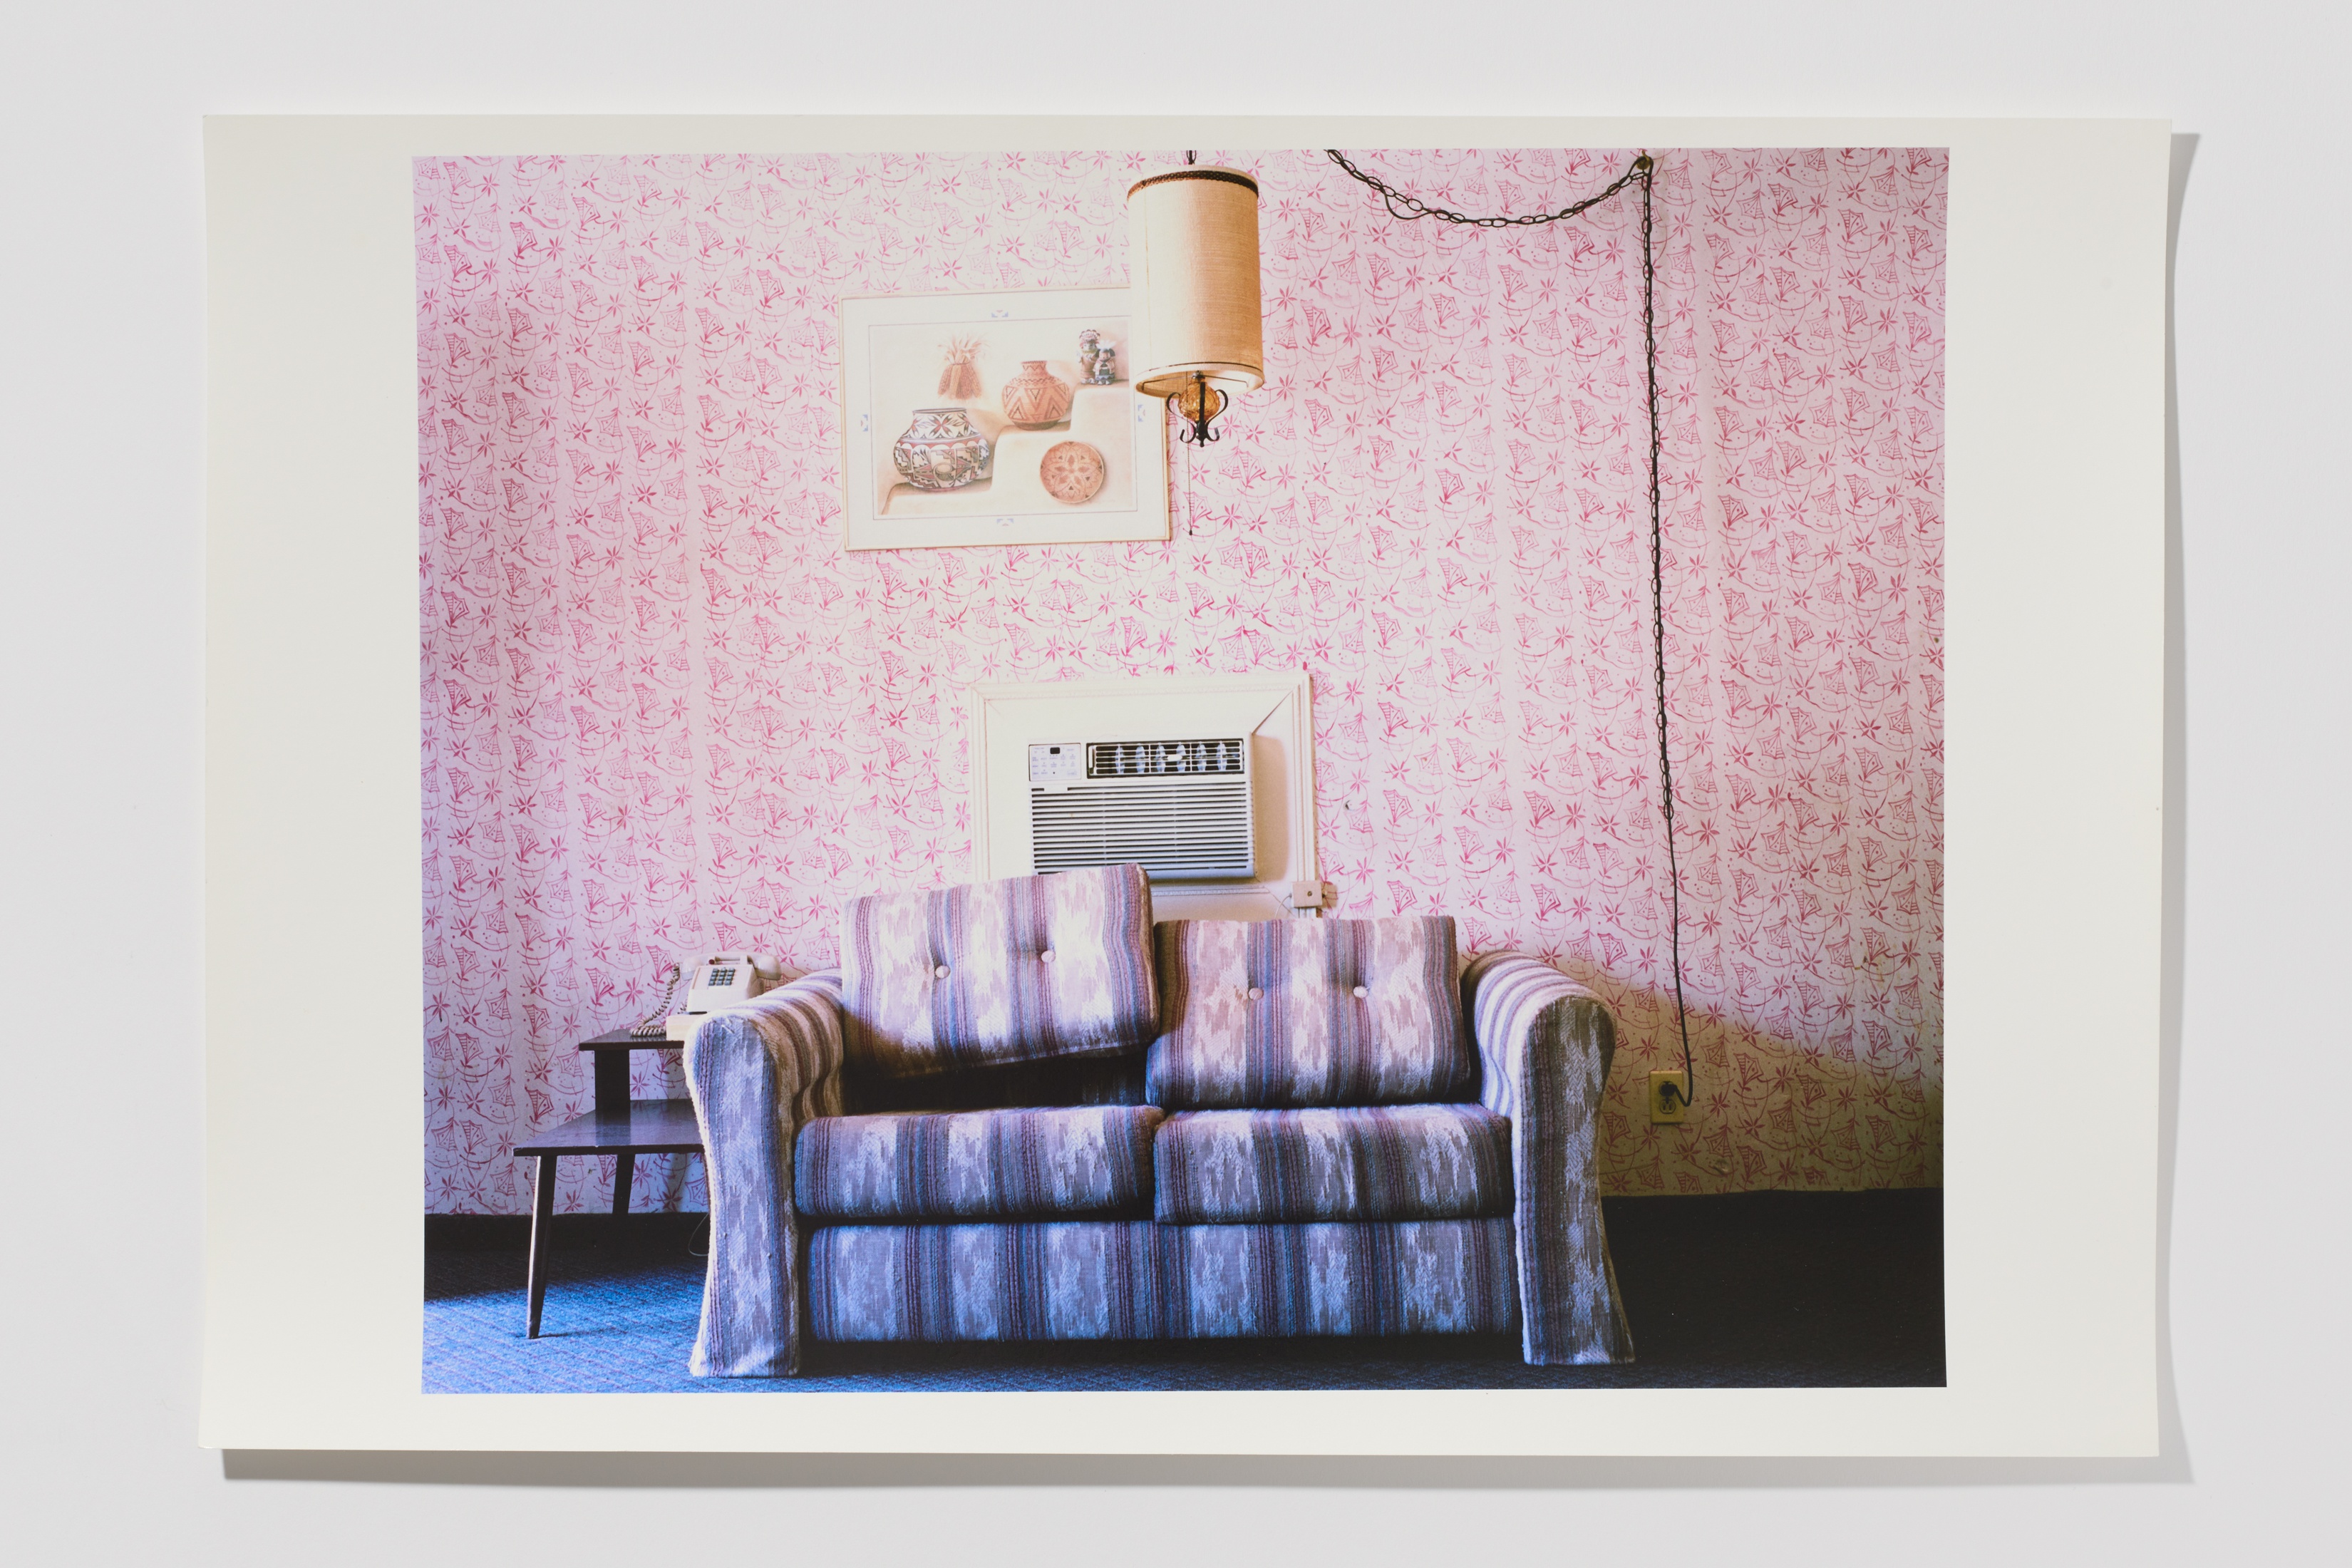 Eric Cousineau from the American Motel series